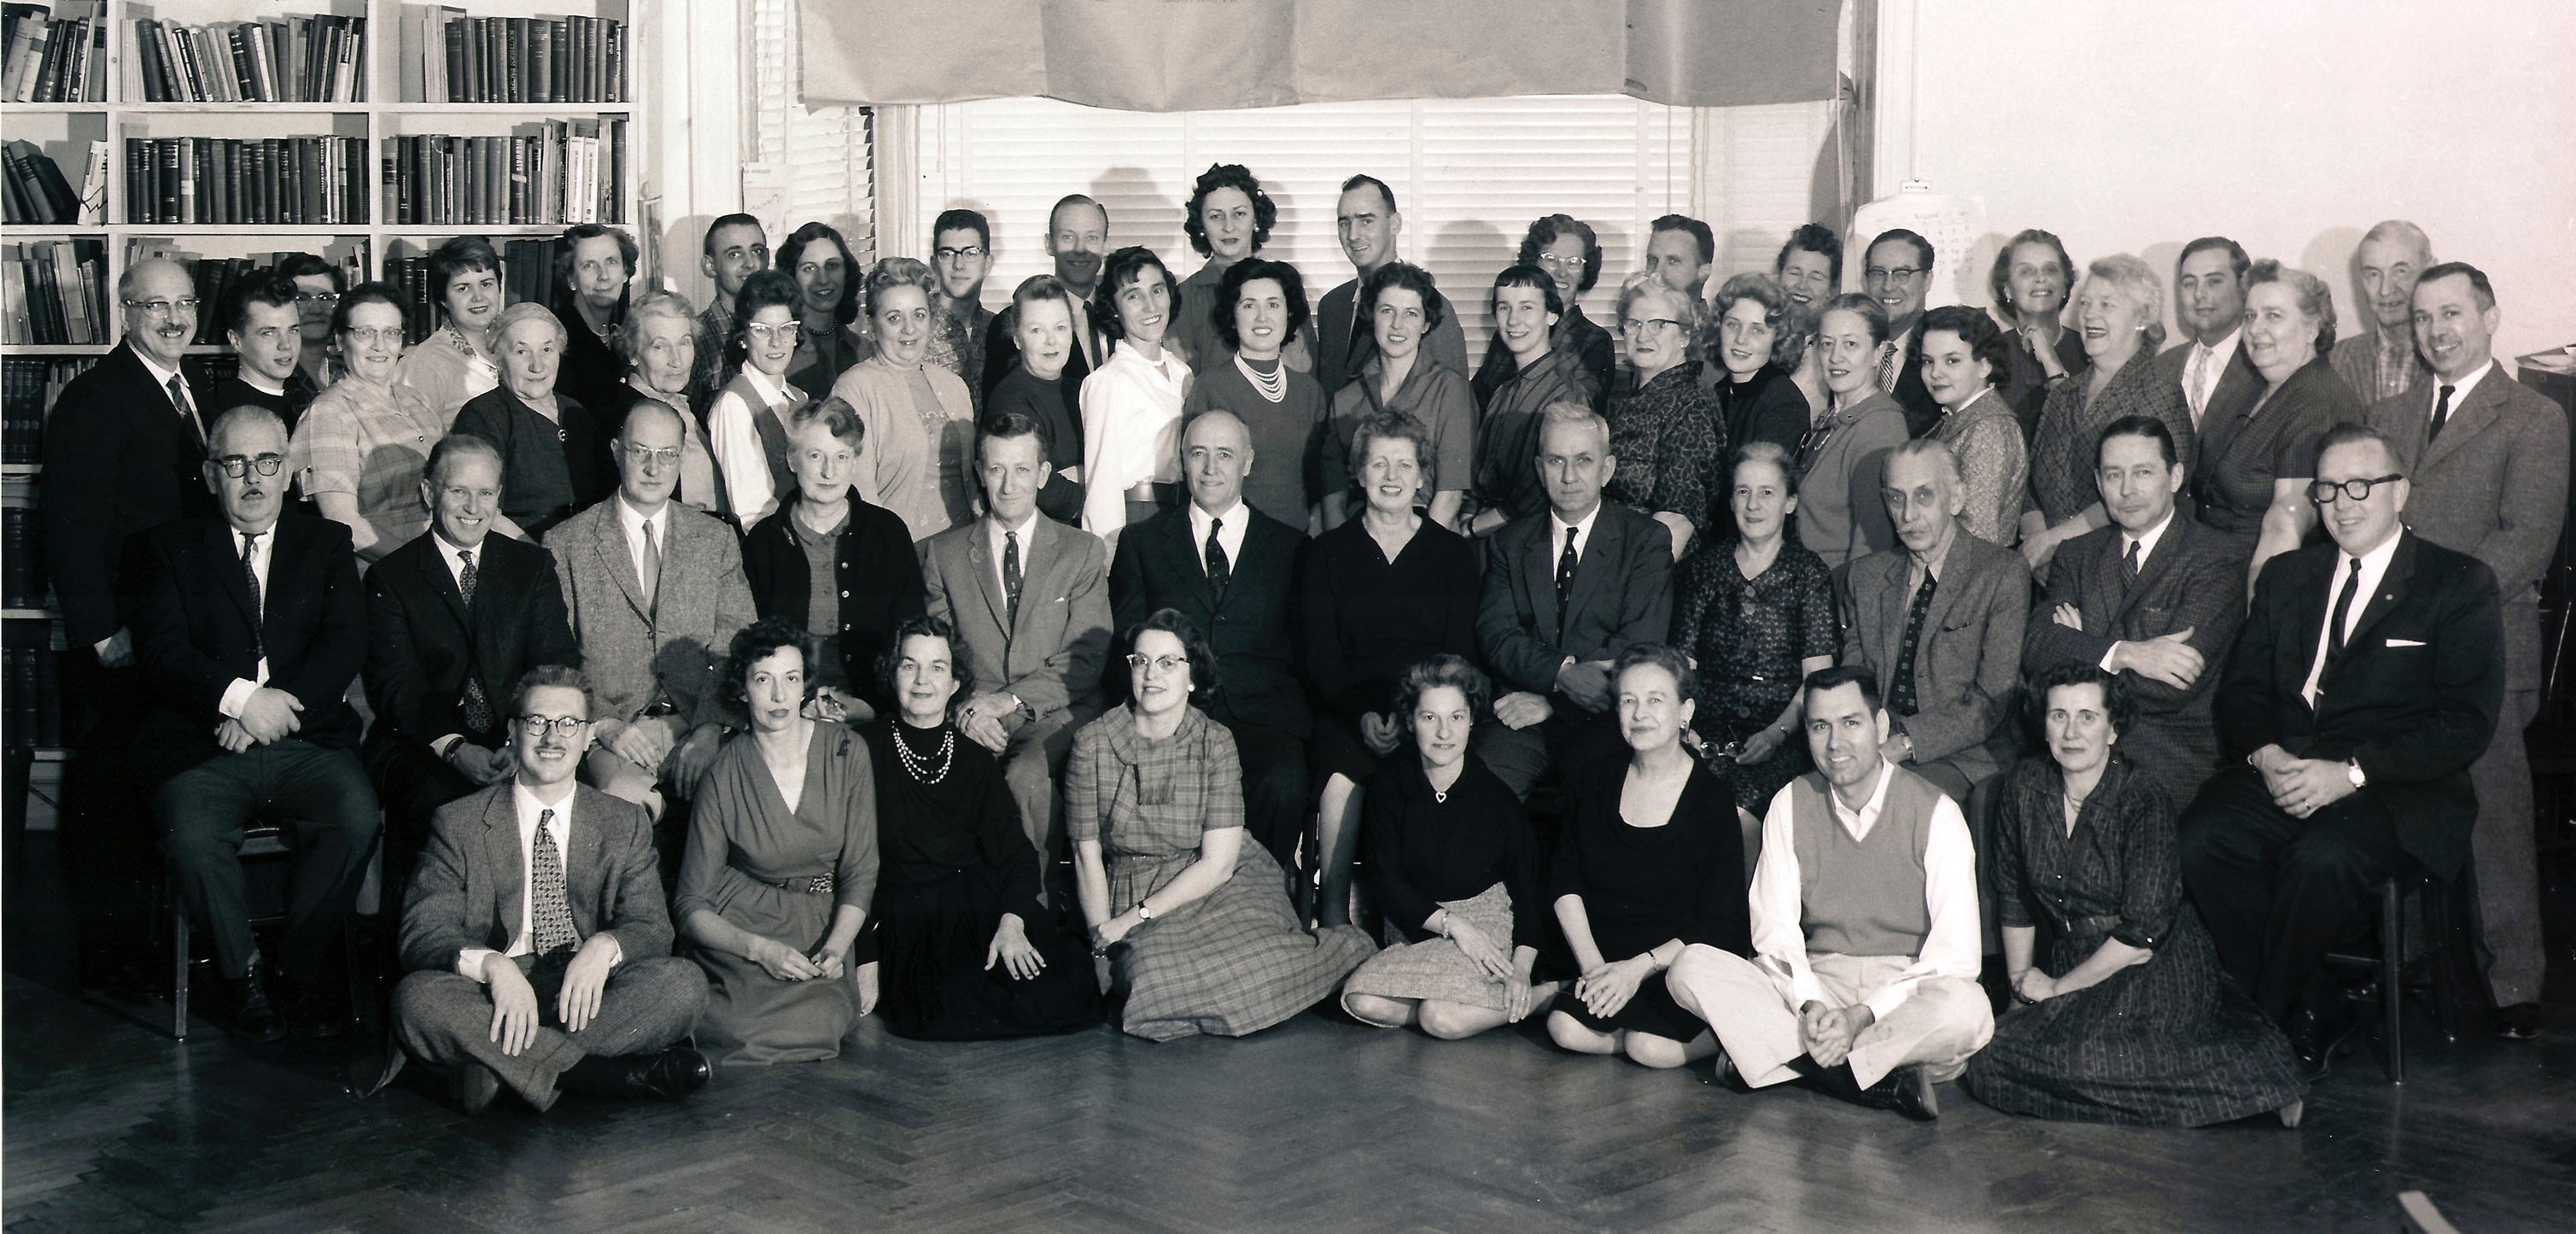 E.C. Harwood and his wife Helen with the 1962 AIER staff.